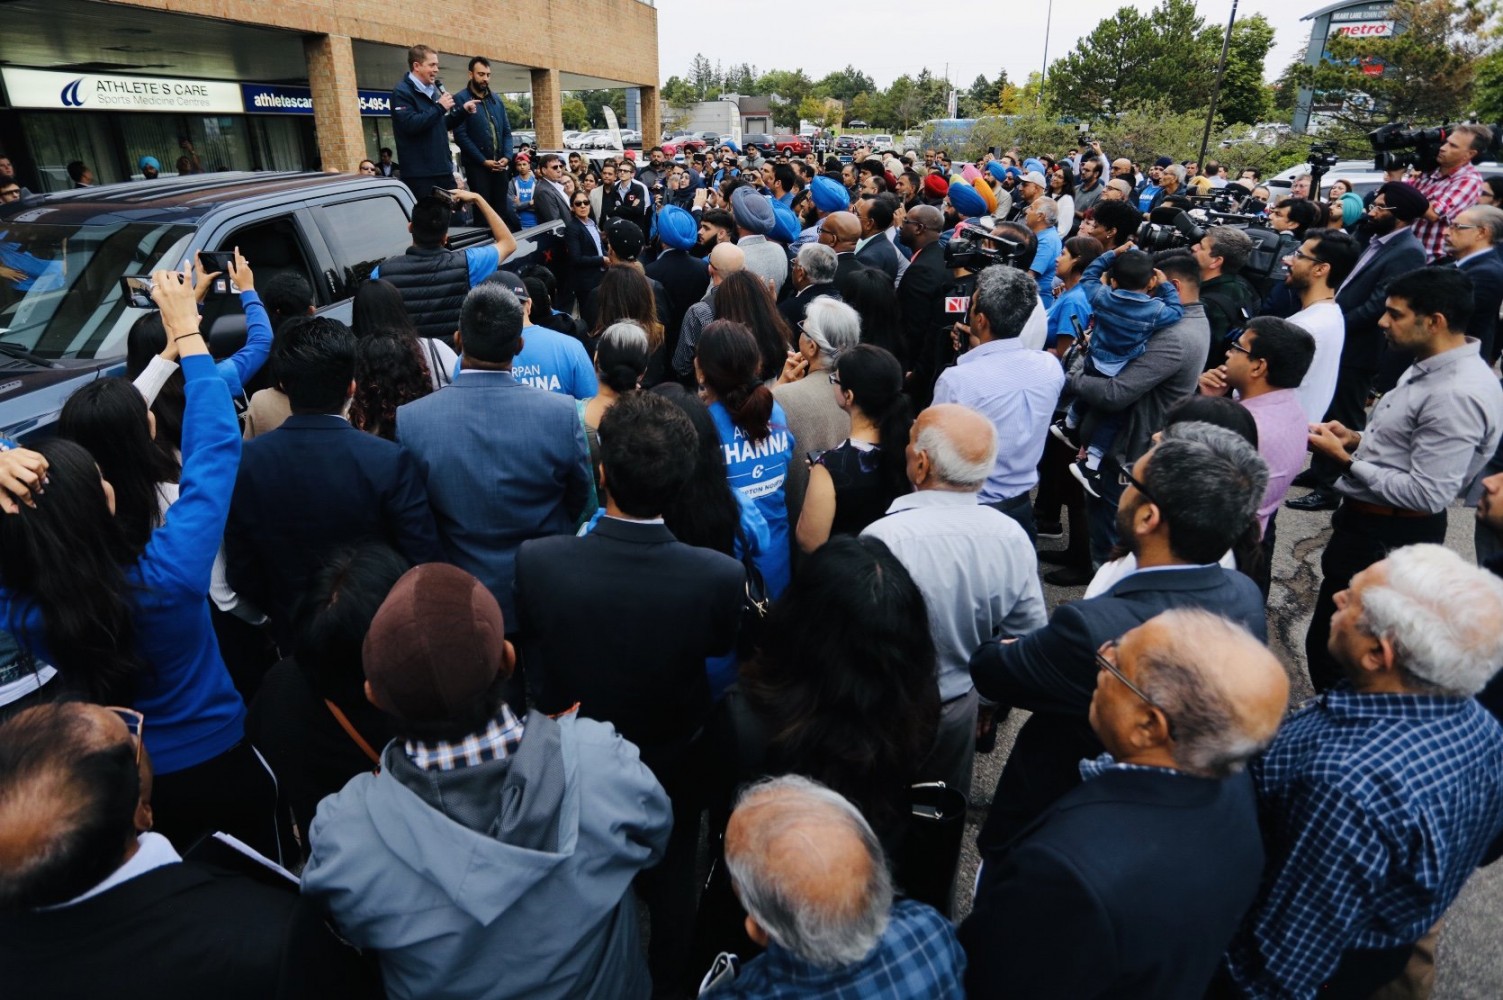 Scheer, Khanna avoid controversy in Brampton North, offer no specifics on local issues